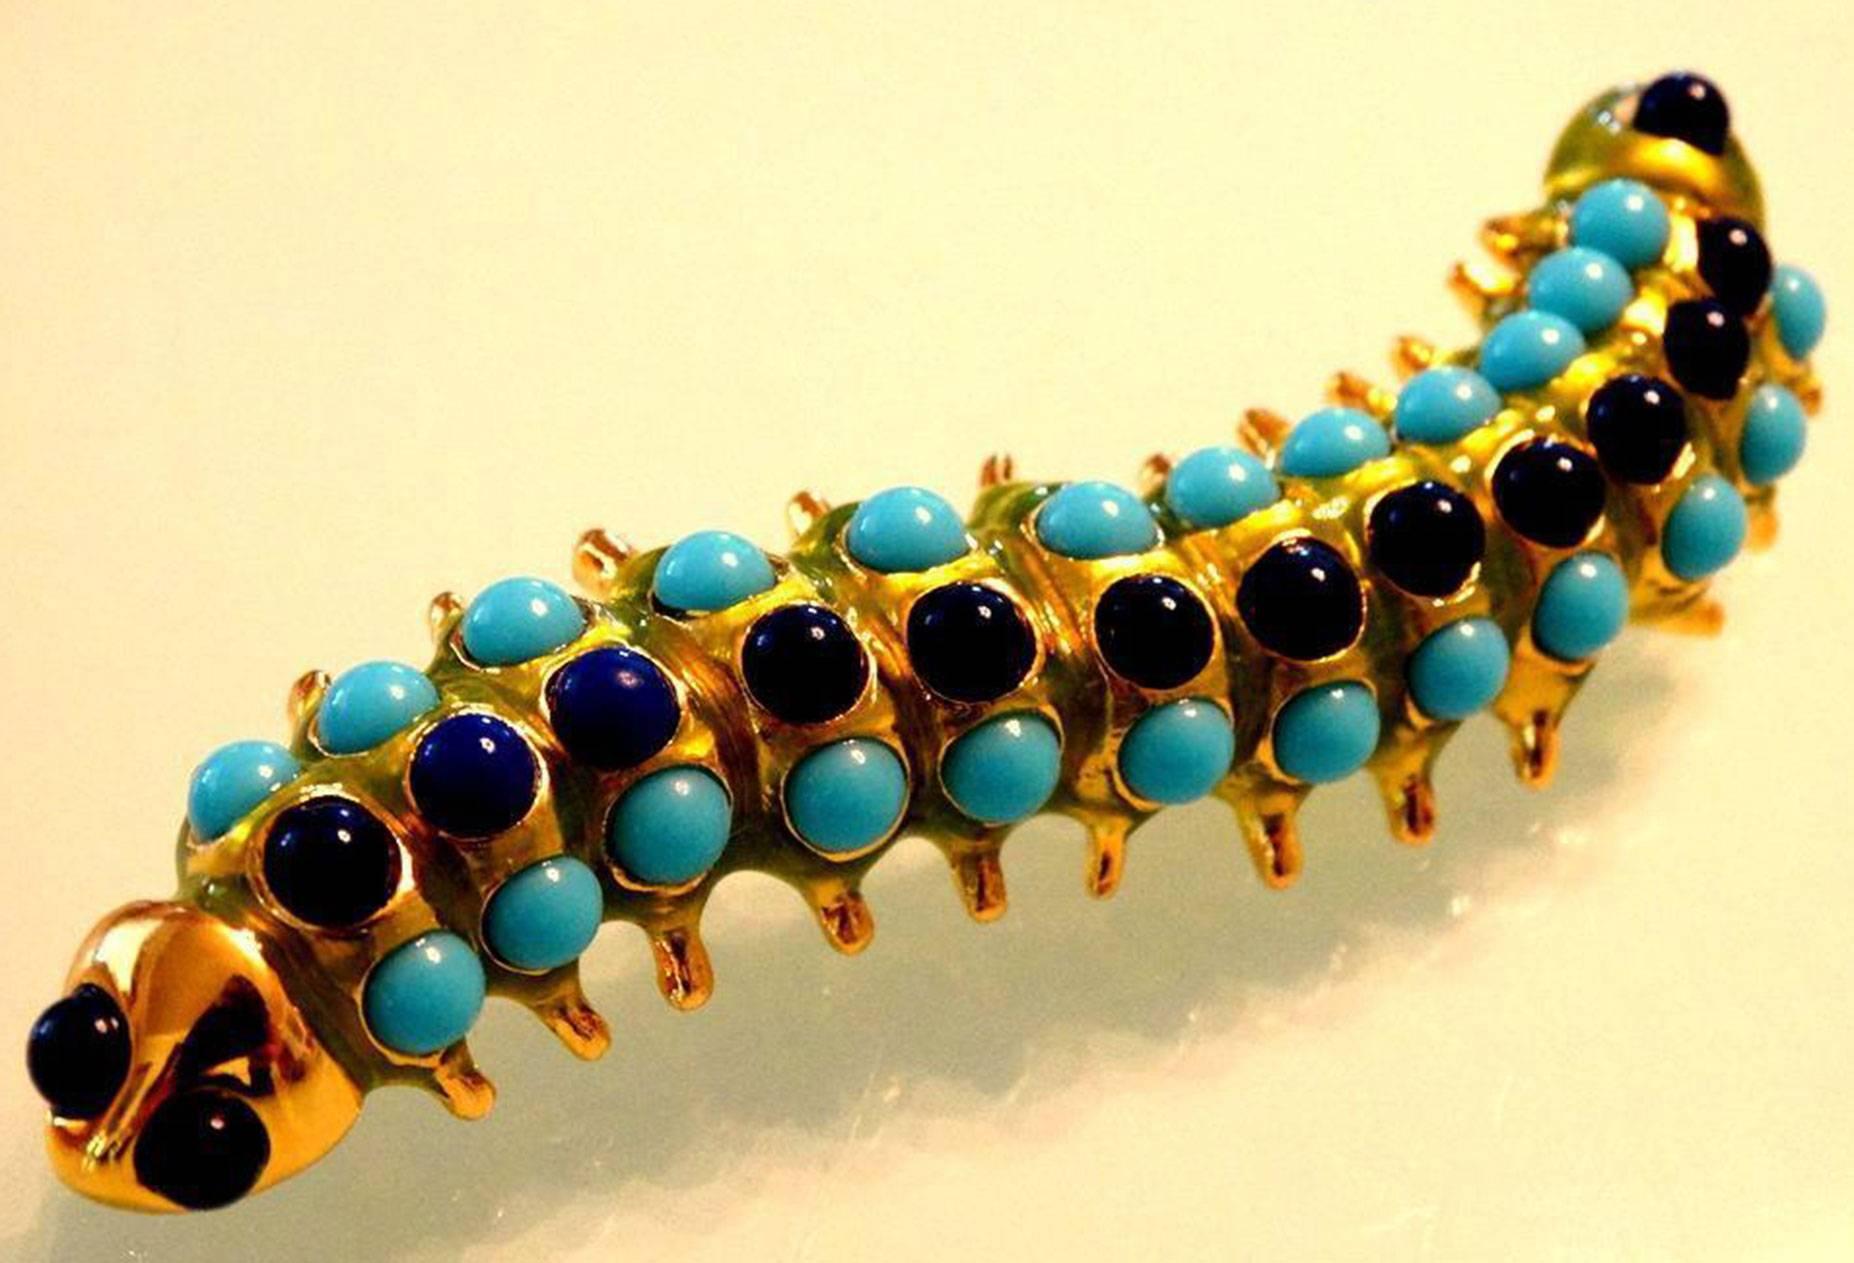 Outstanding Faux Cabochon Lapis Turquoise Caterpillar Brooch Pin; Gold tone mounting; Signed: KENNETH LANE; approx. 3